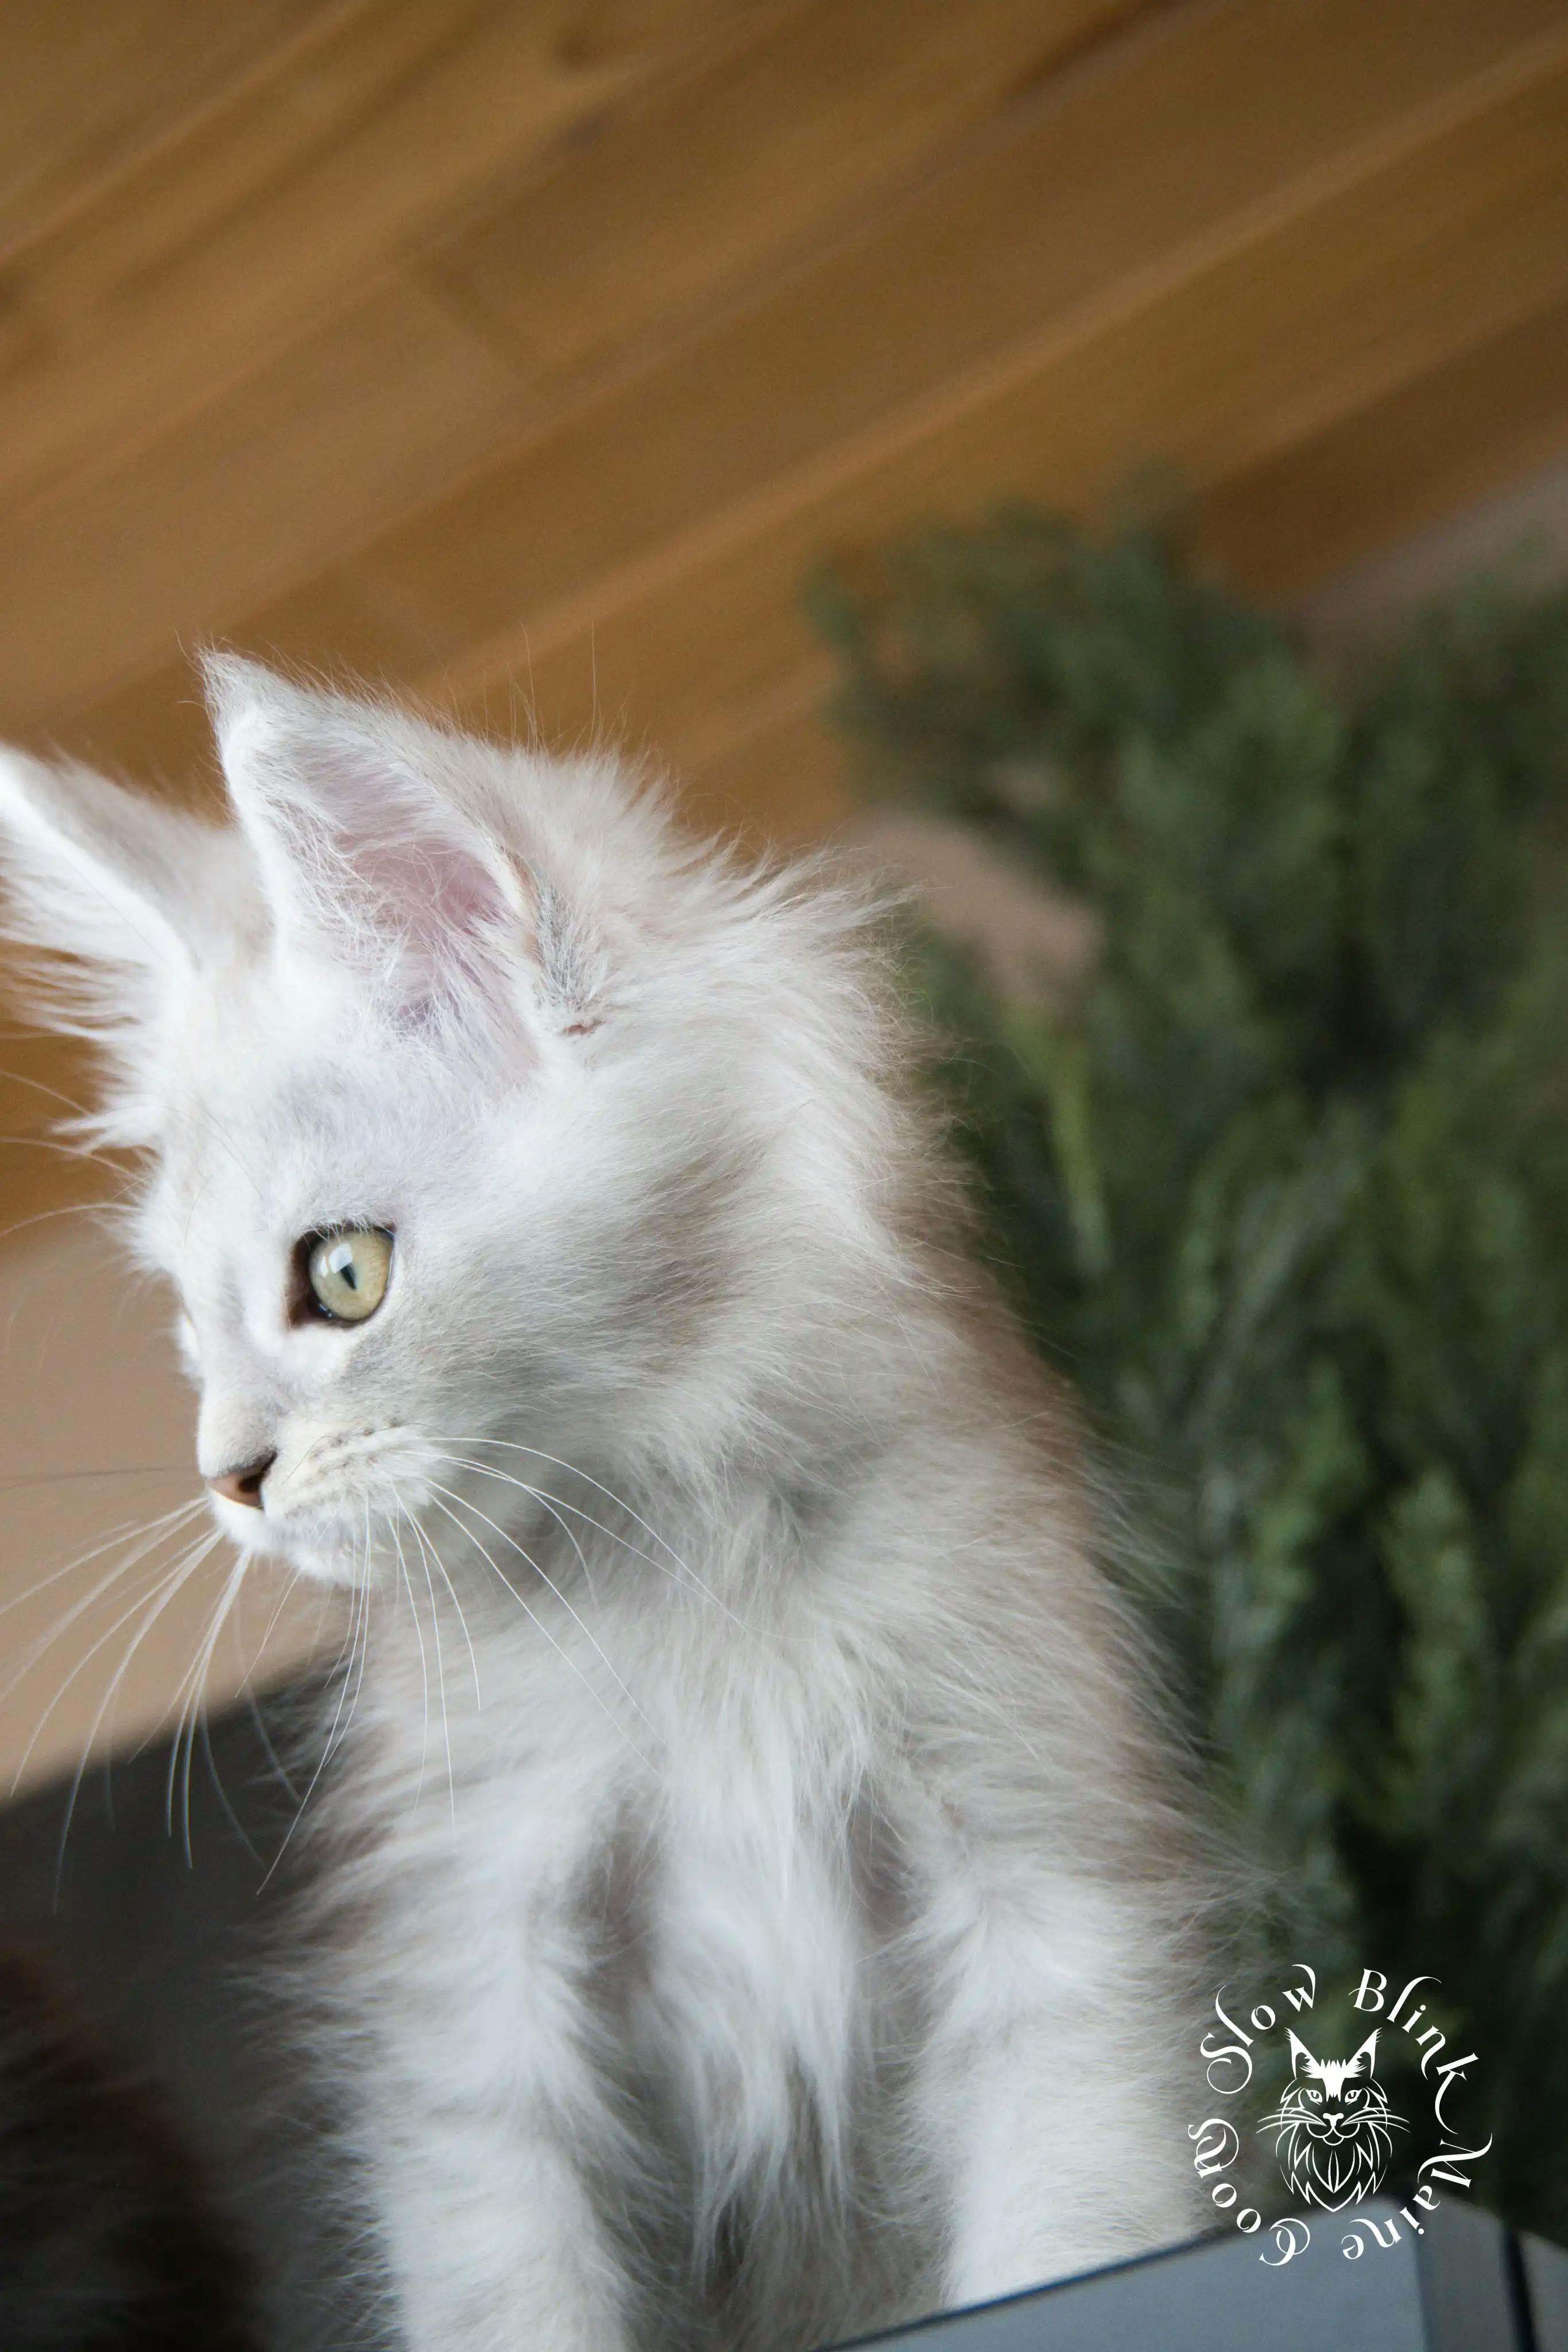 High Silver Maine Coon Kittens > black silver tabby maine coon kitten | ems code ns 22 23 24 25 | slowblinkmainecoons | 585